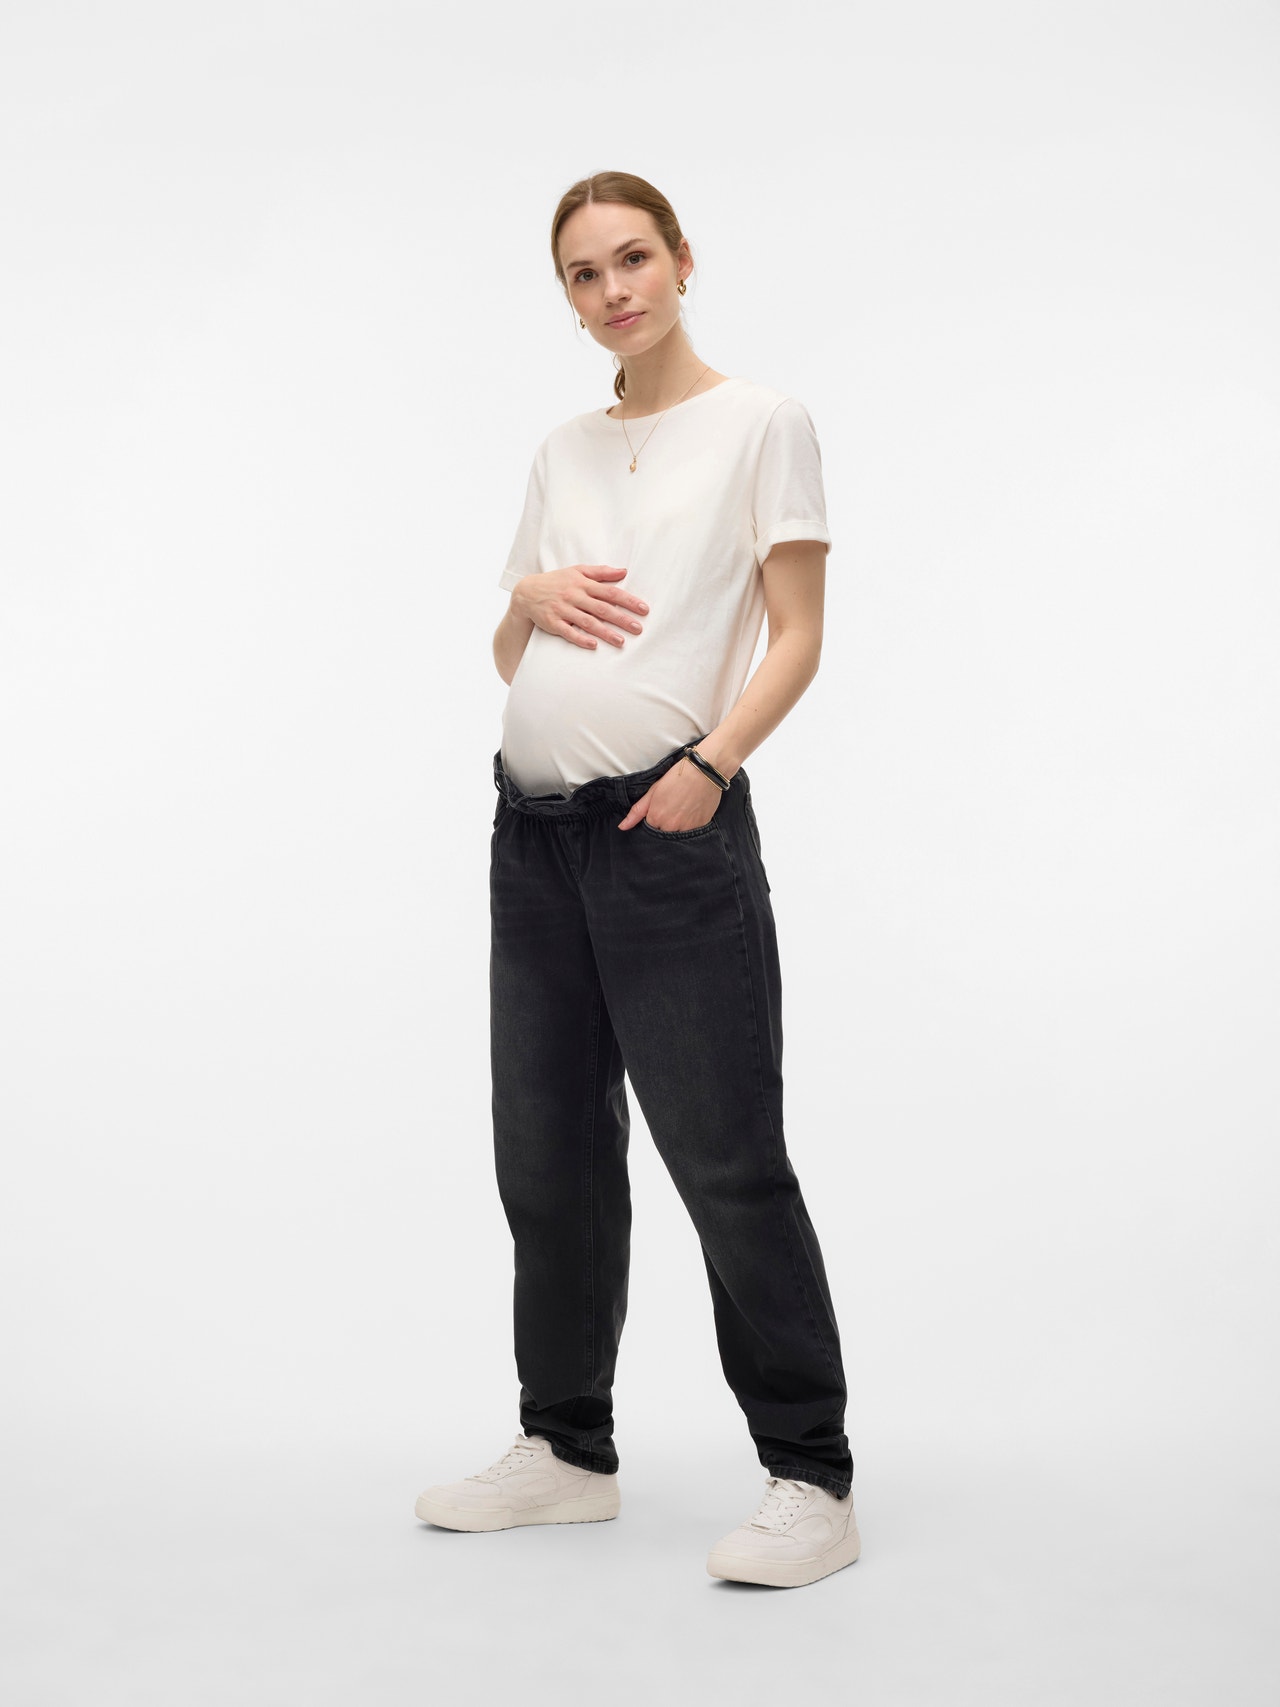 MAMA.LICIOUS Jeans Mom Fit Taille basse -Black Denim - 20020031